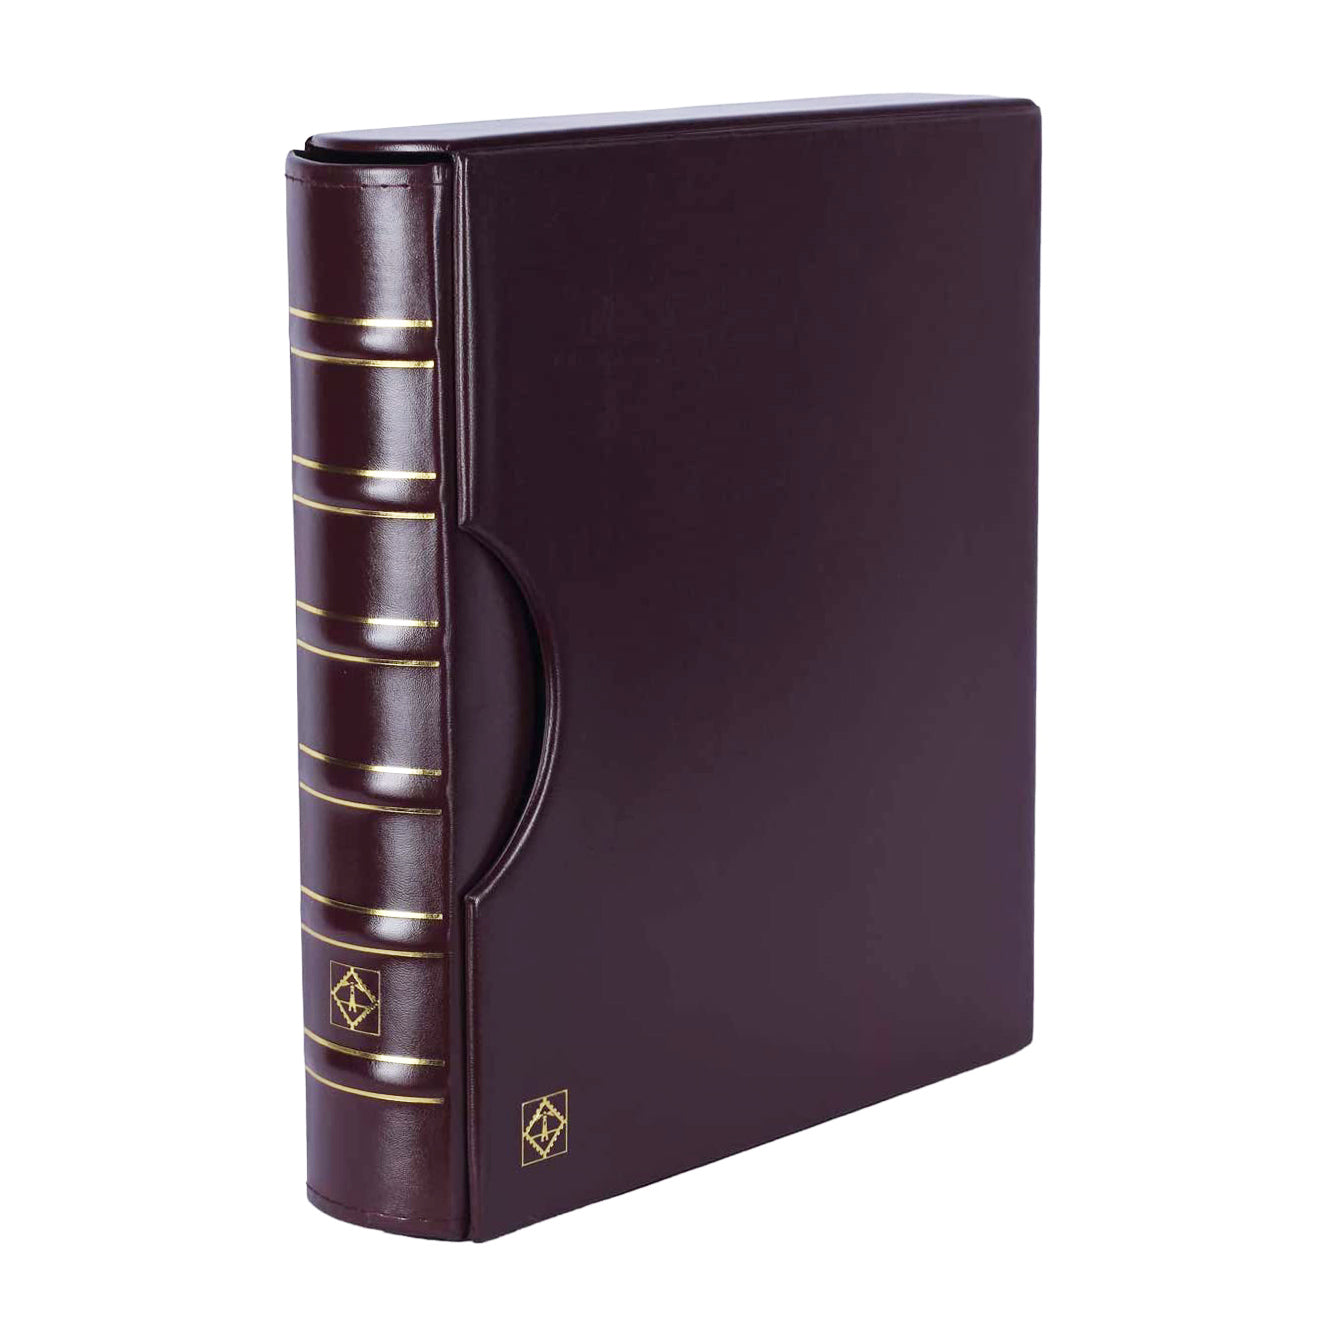 Classic Grande 3-Ring Binder with Slipcase for Storage of Coins, Stamps, Currency